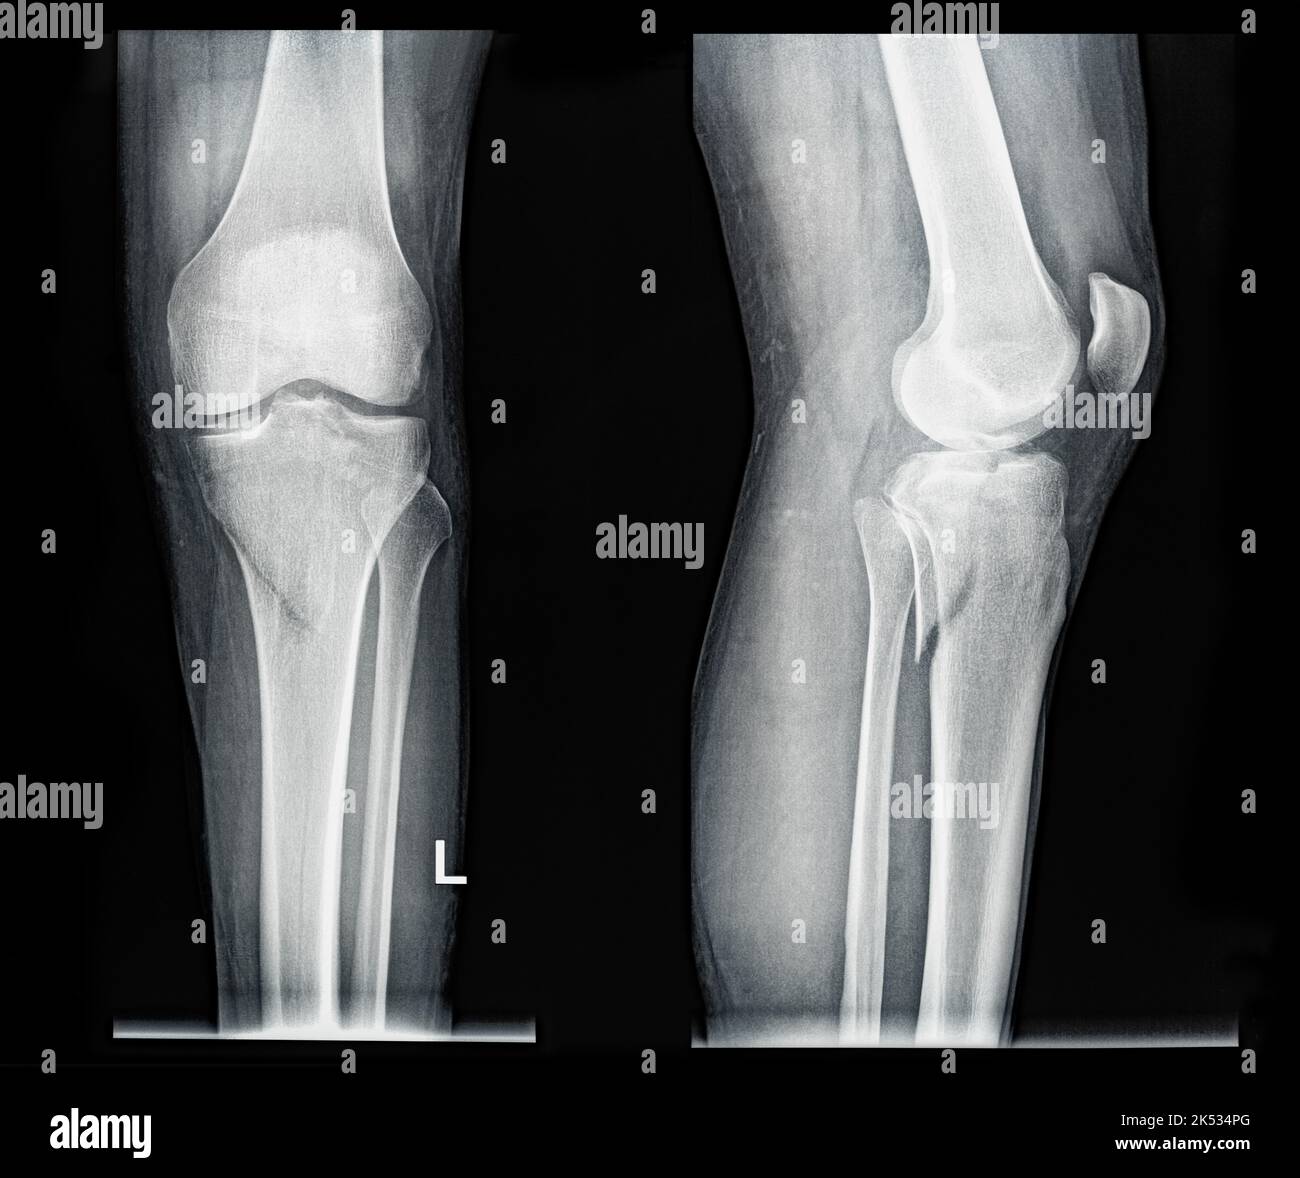 Xray MRI images showing real fracture of broken leg bone under the knee after injury Stock Photo